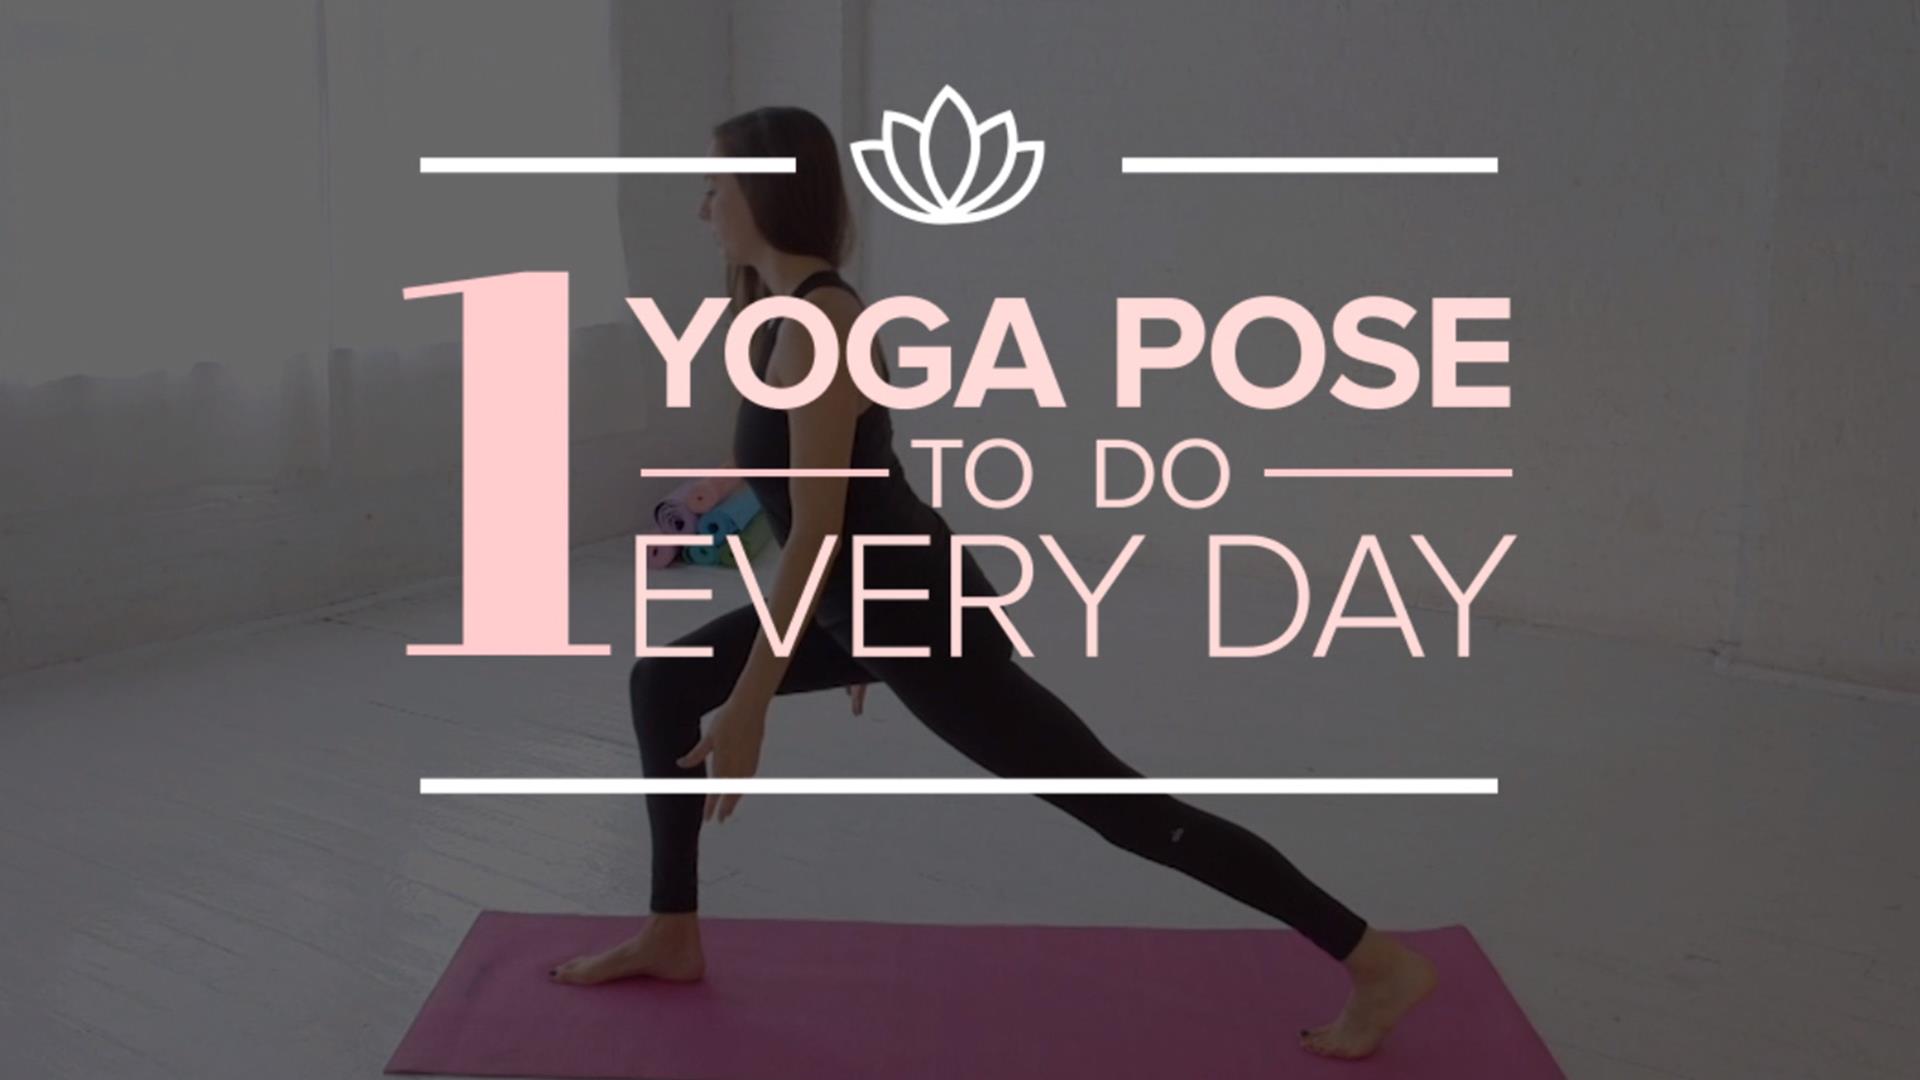 What is the set of yoga asanas you perform every day? - Quora